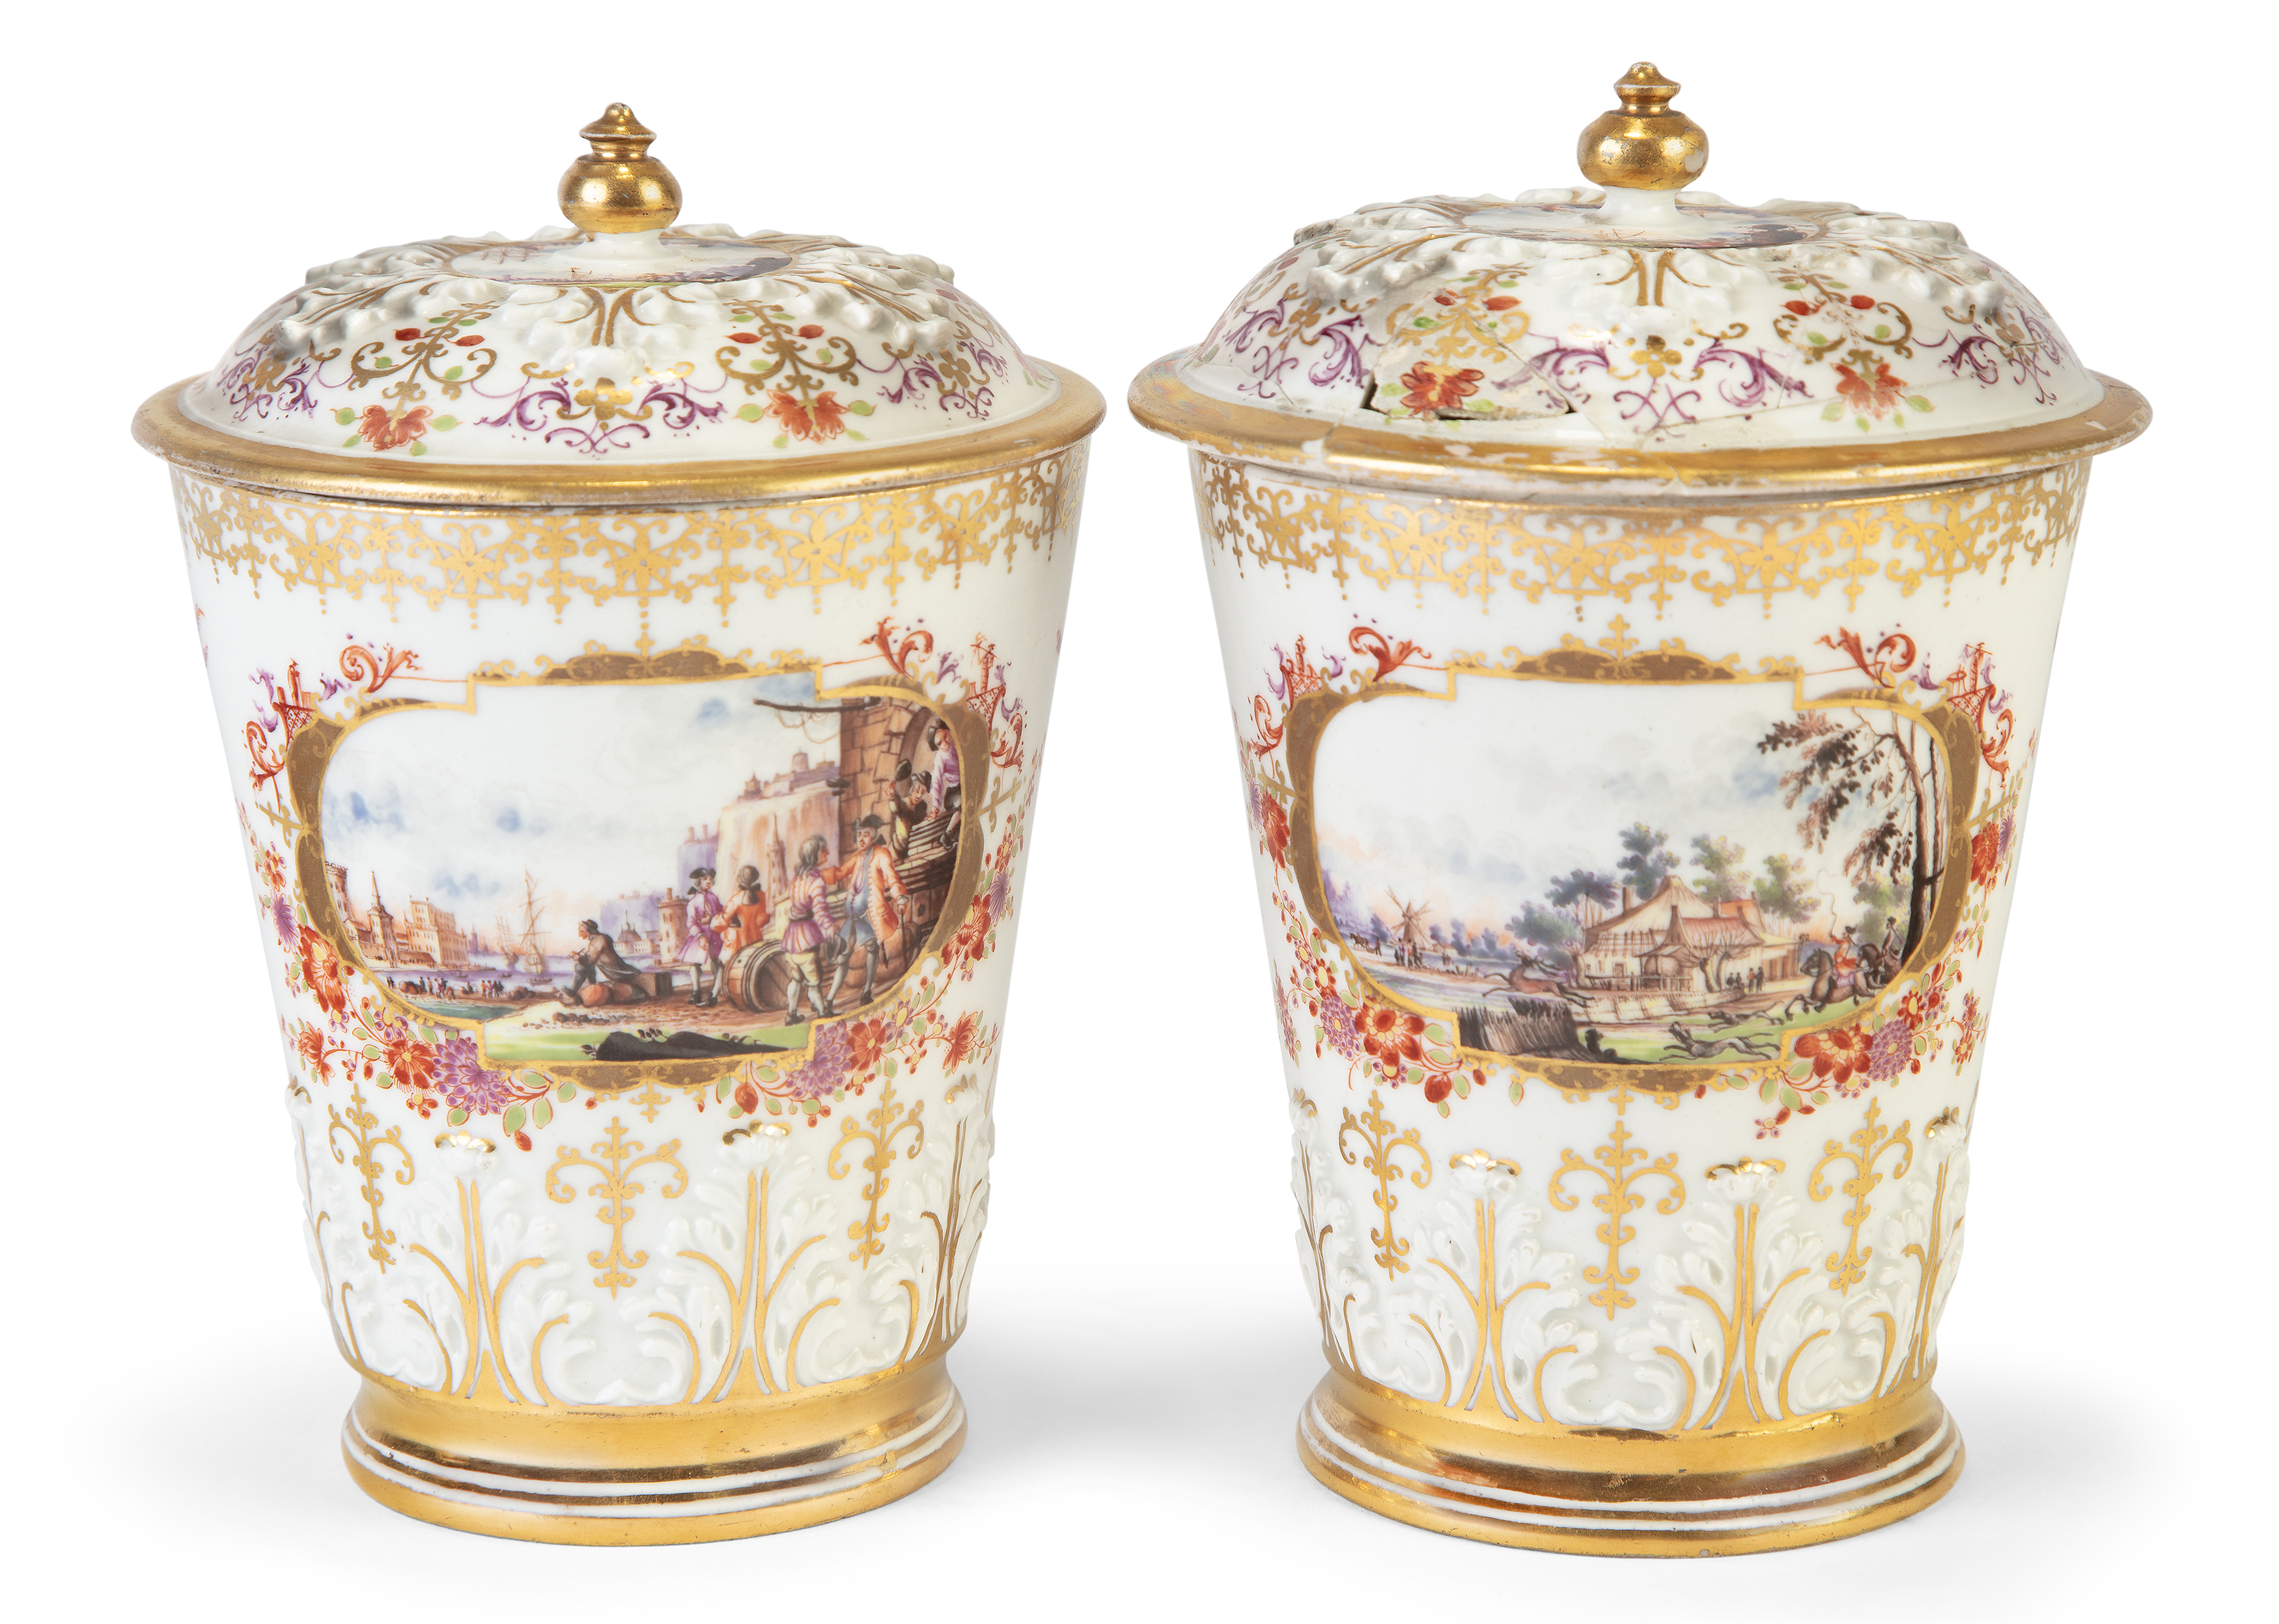 A pair of Meissen porcelain beakers and covers, 19th century, blue crossed swords marks, gilt 1. ...